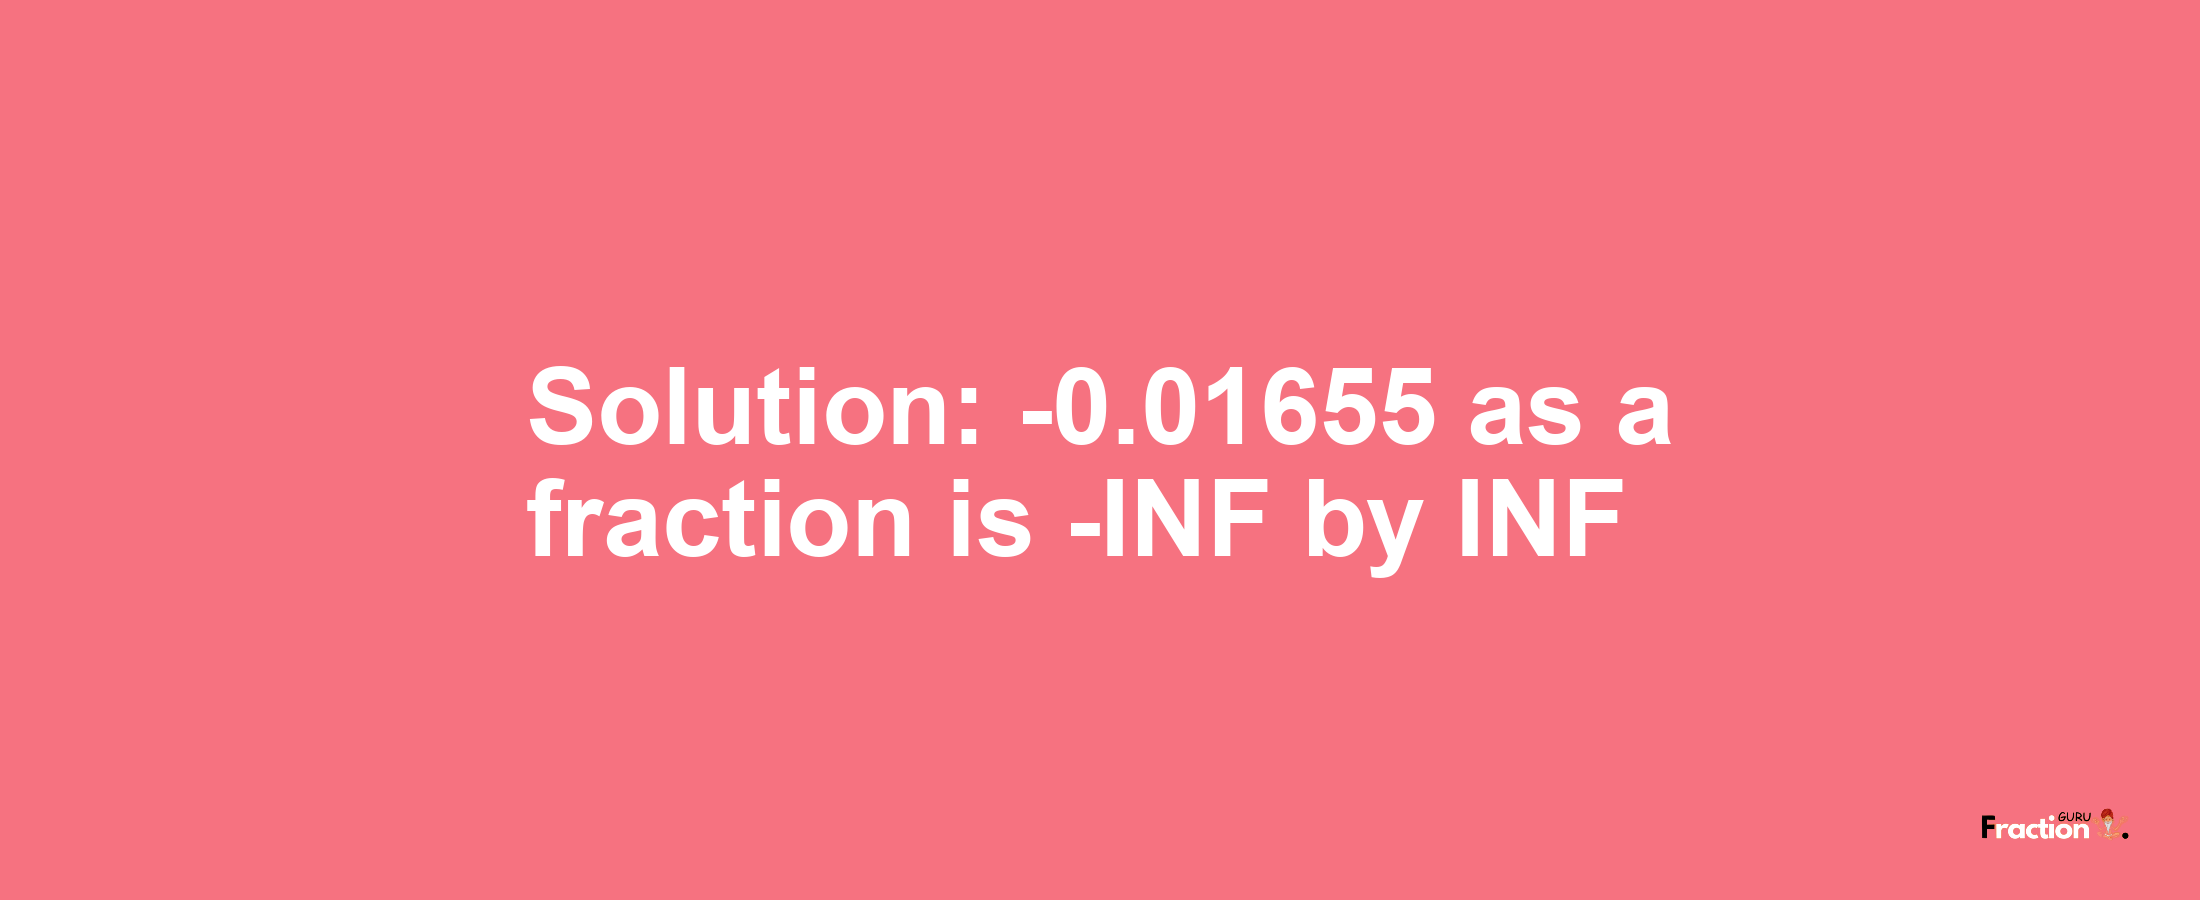 Solution:-0.01655 as a fraction is -INF/INF